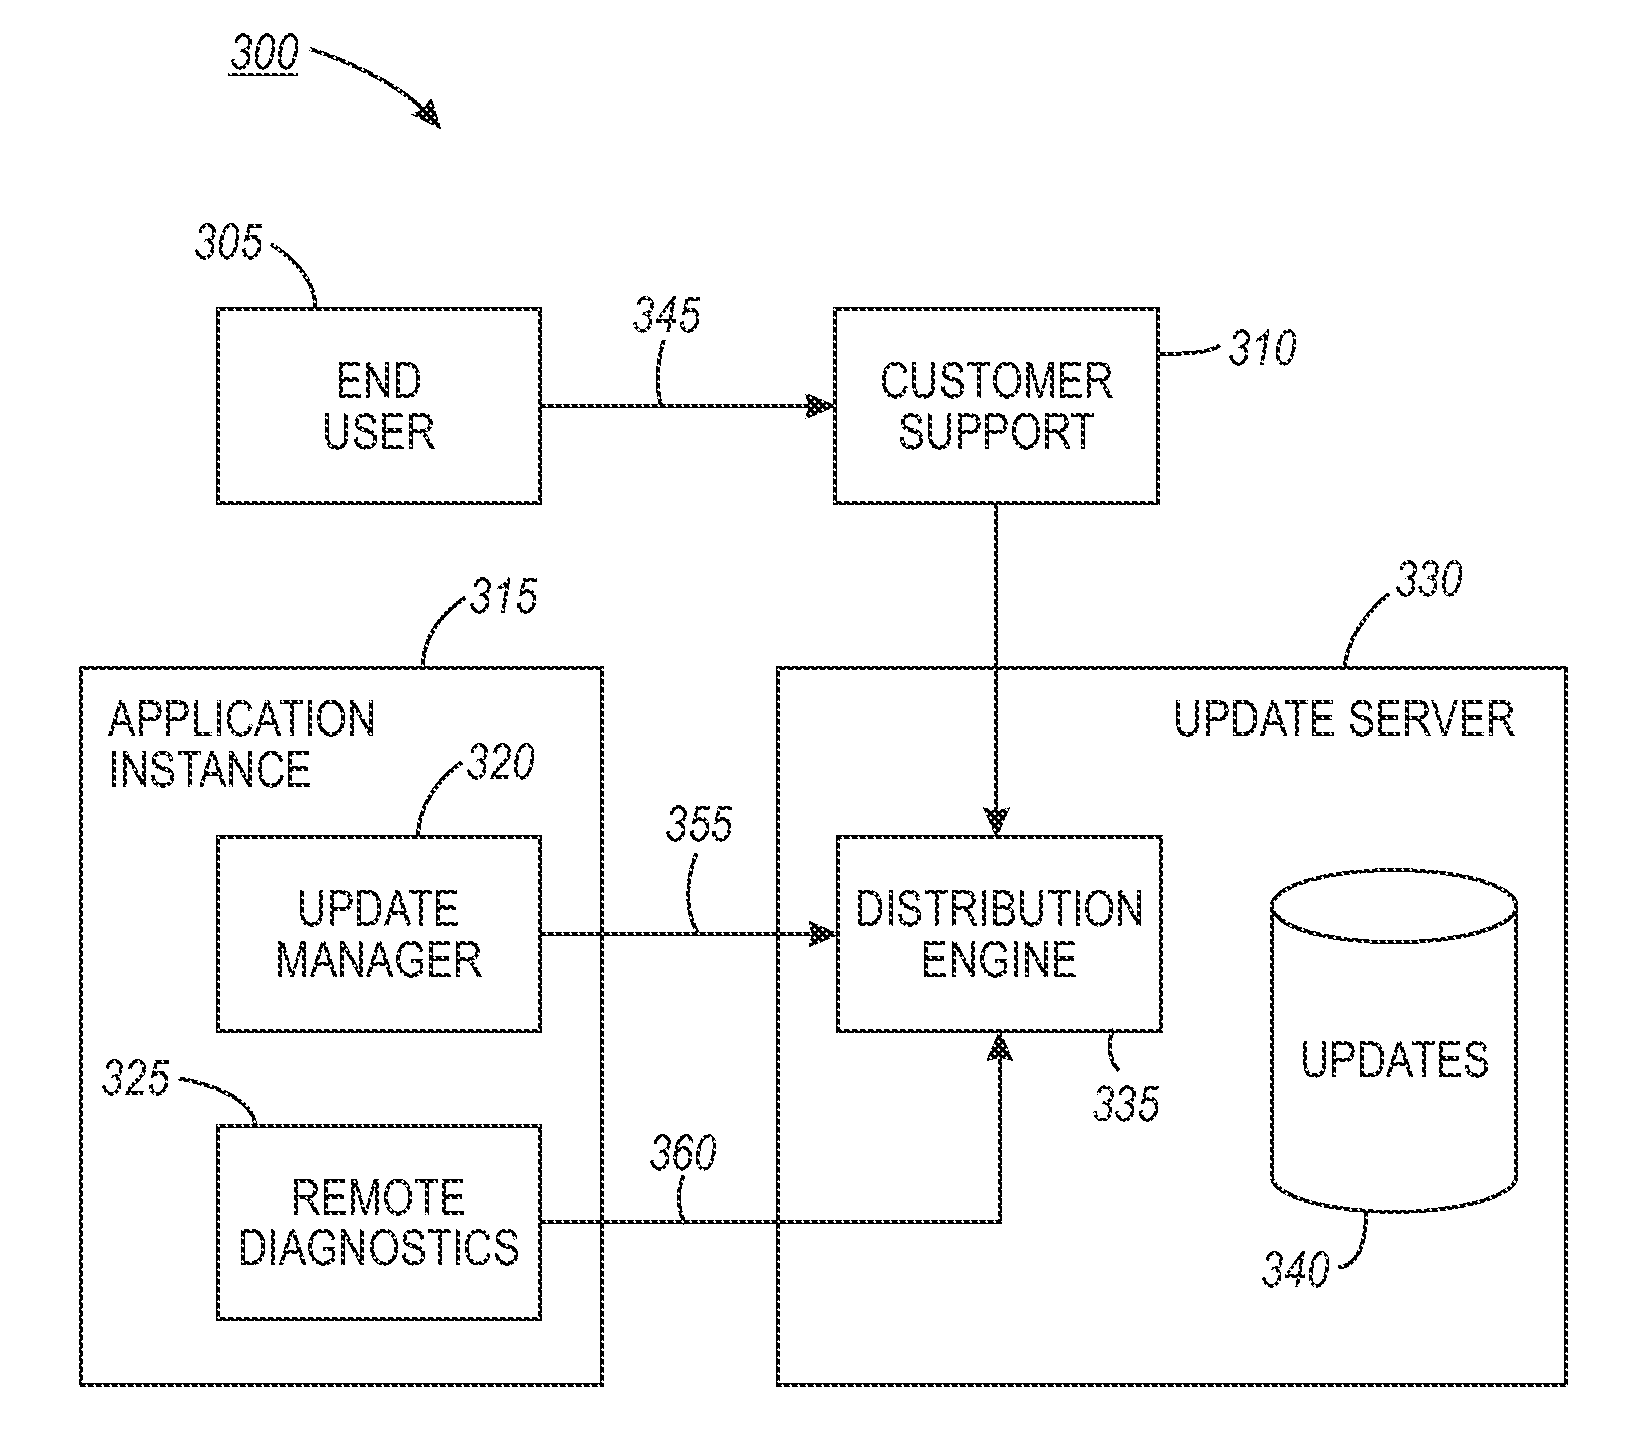 Method and system to regulate the electronic availability of application software updates based on information collected regarding installation, usage and support for these updates